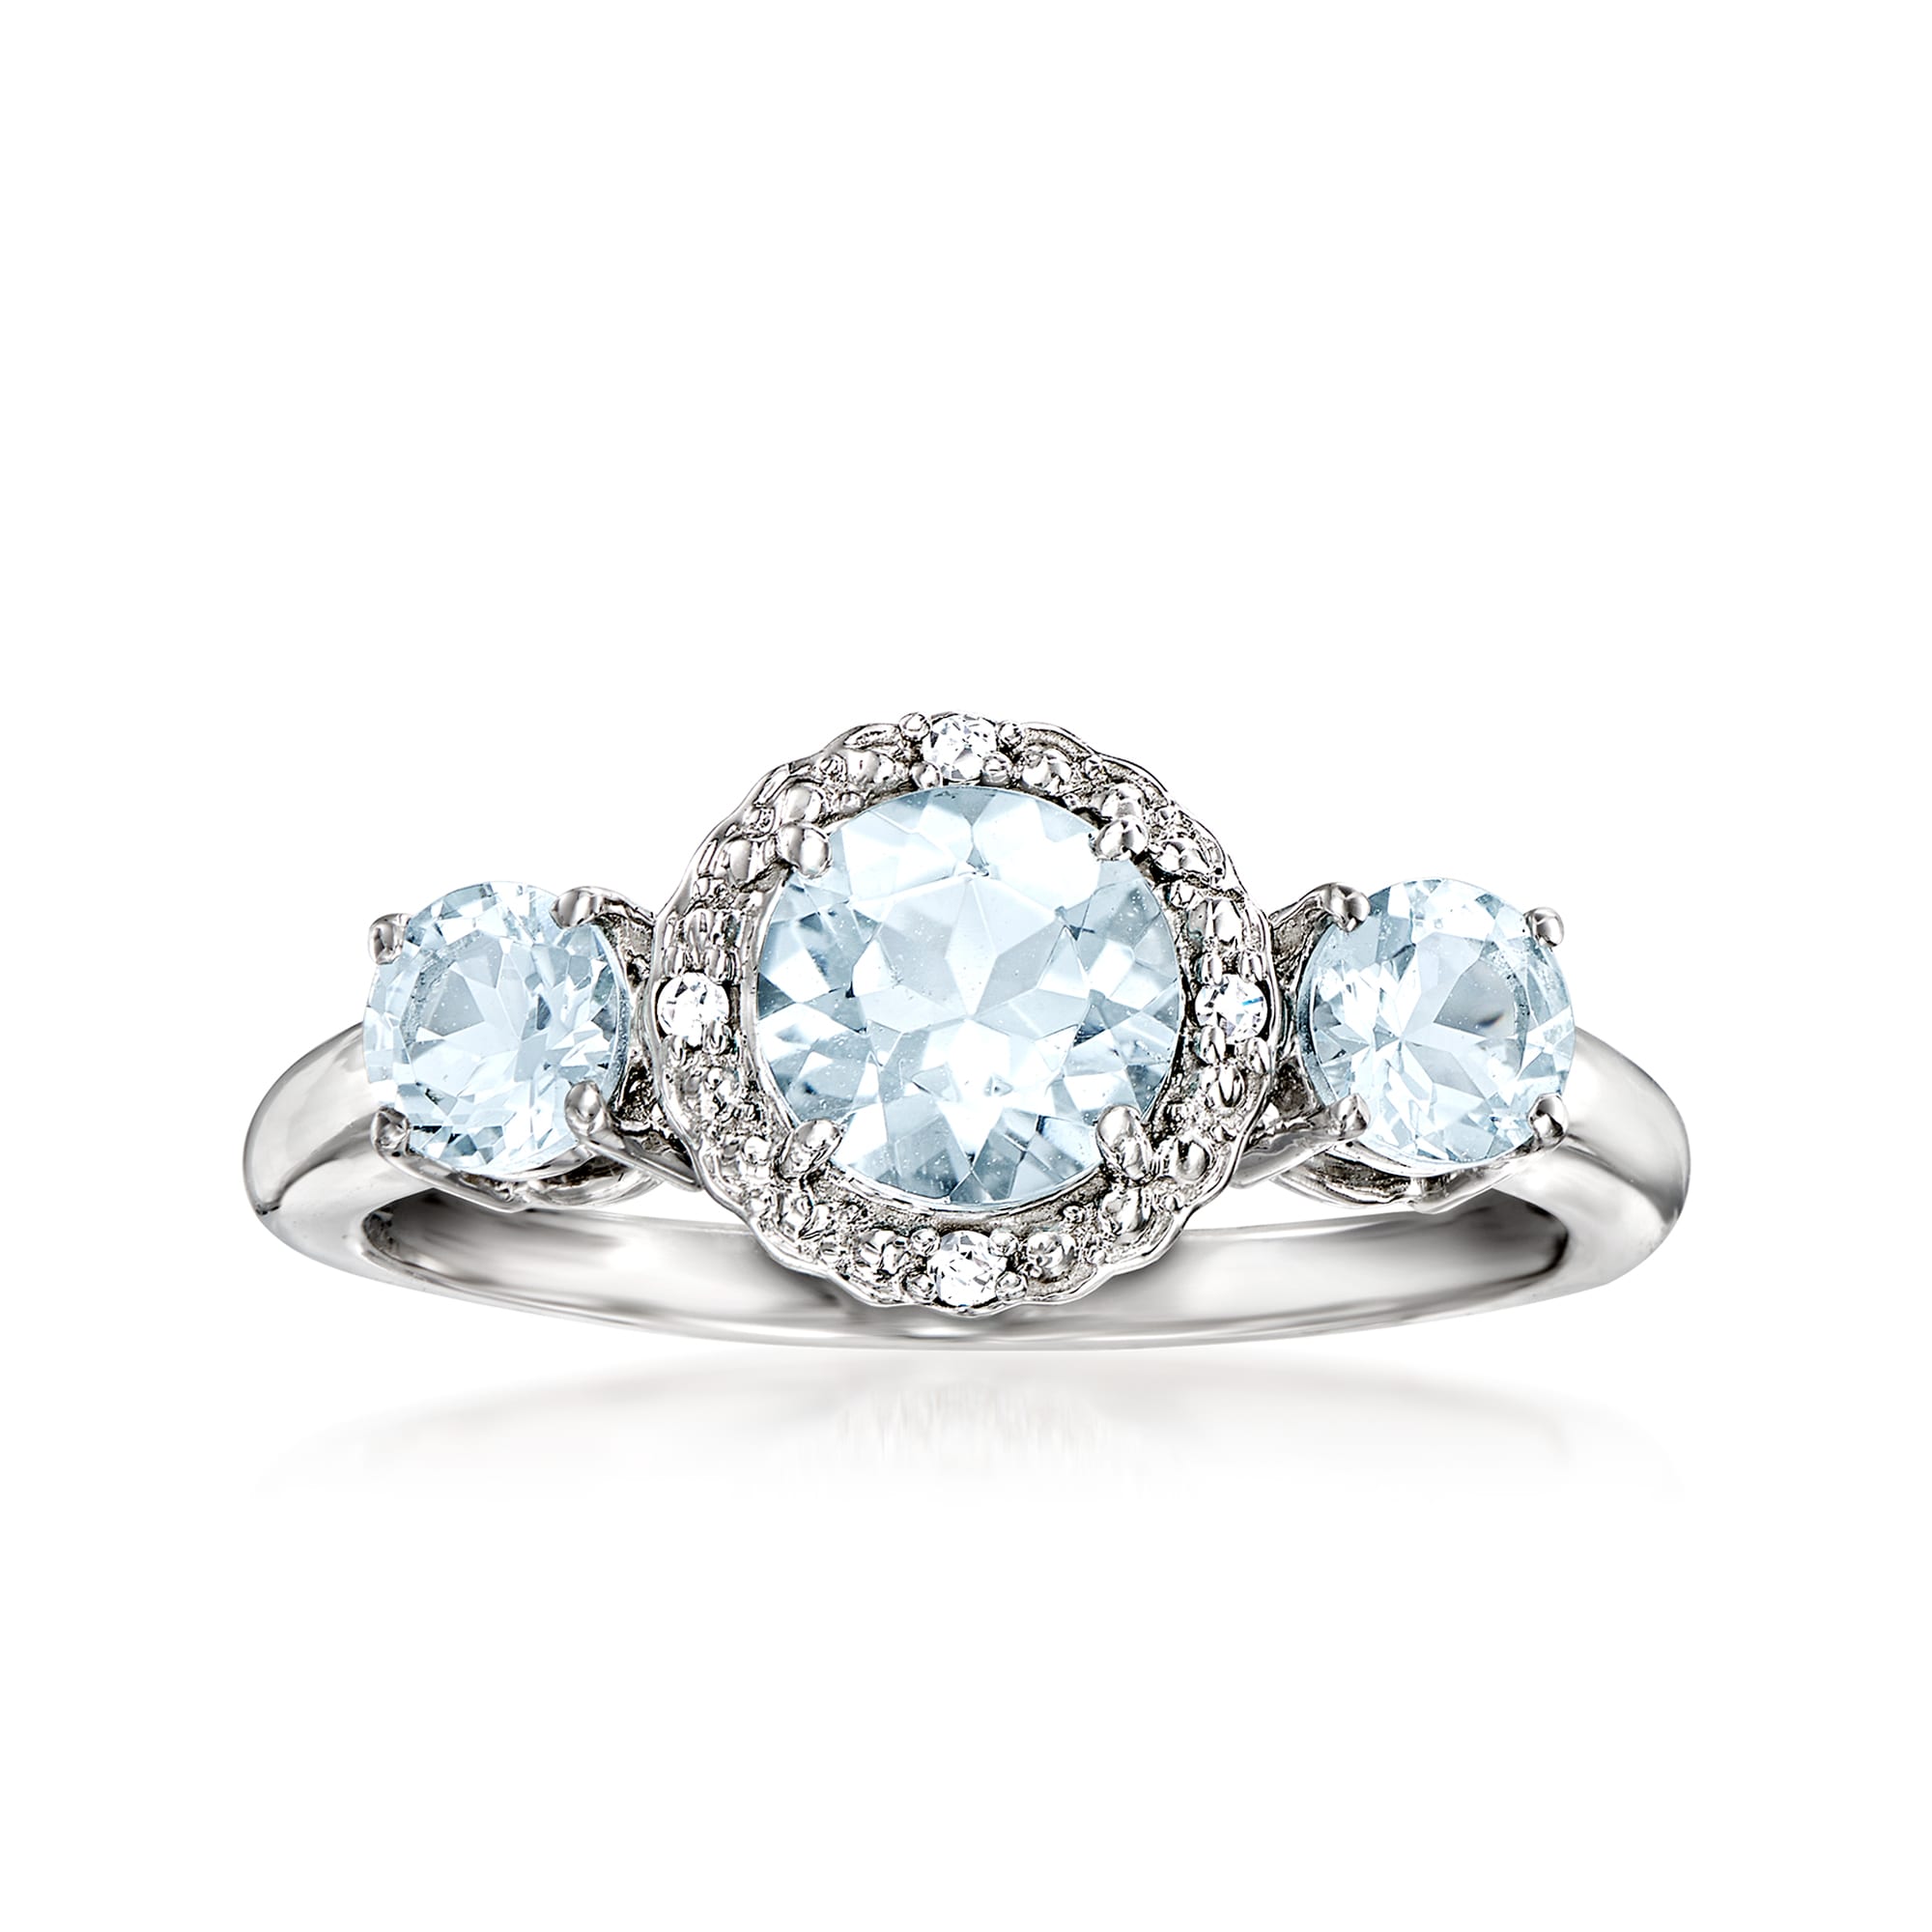 1.20 ct. t.w. Aquamarine Ring with Diamond Accents in 14kt White Gold ...